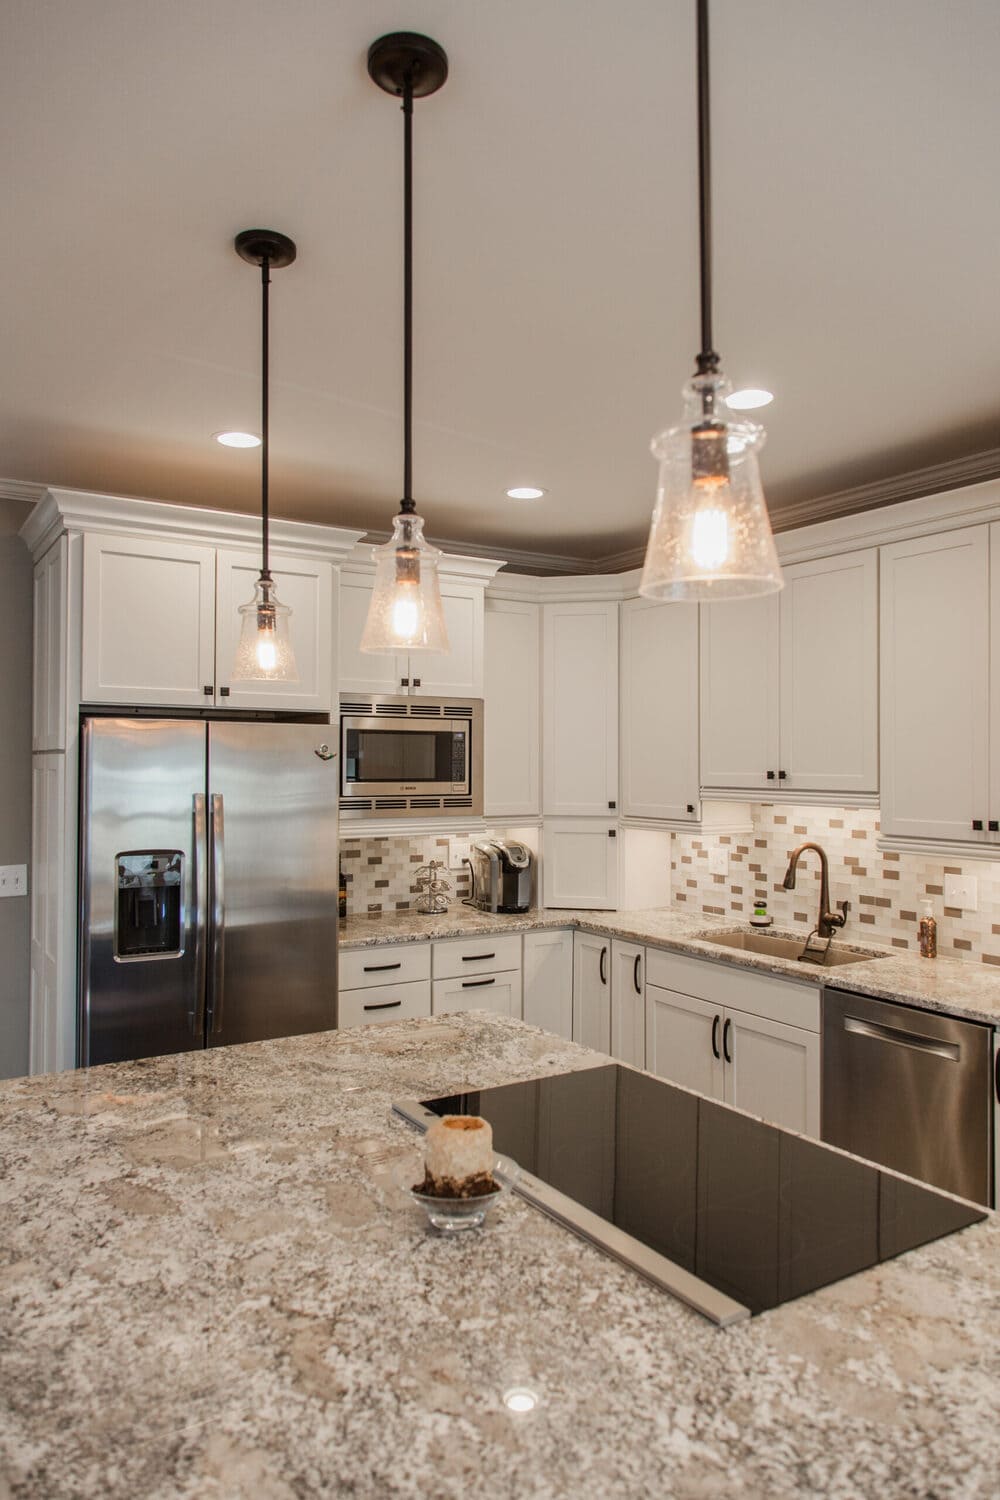 Custom kitchen remodel with white shaker cabinets and large island